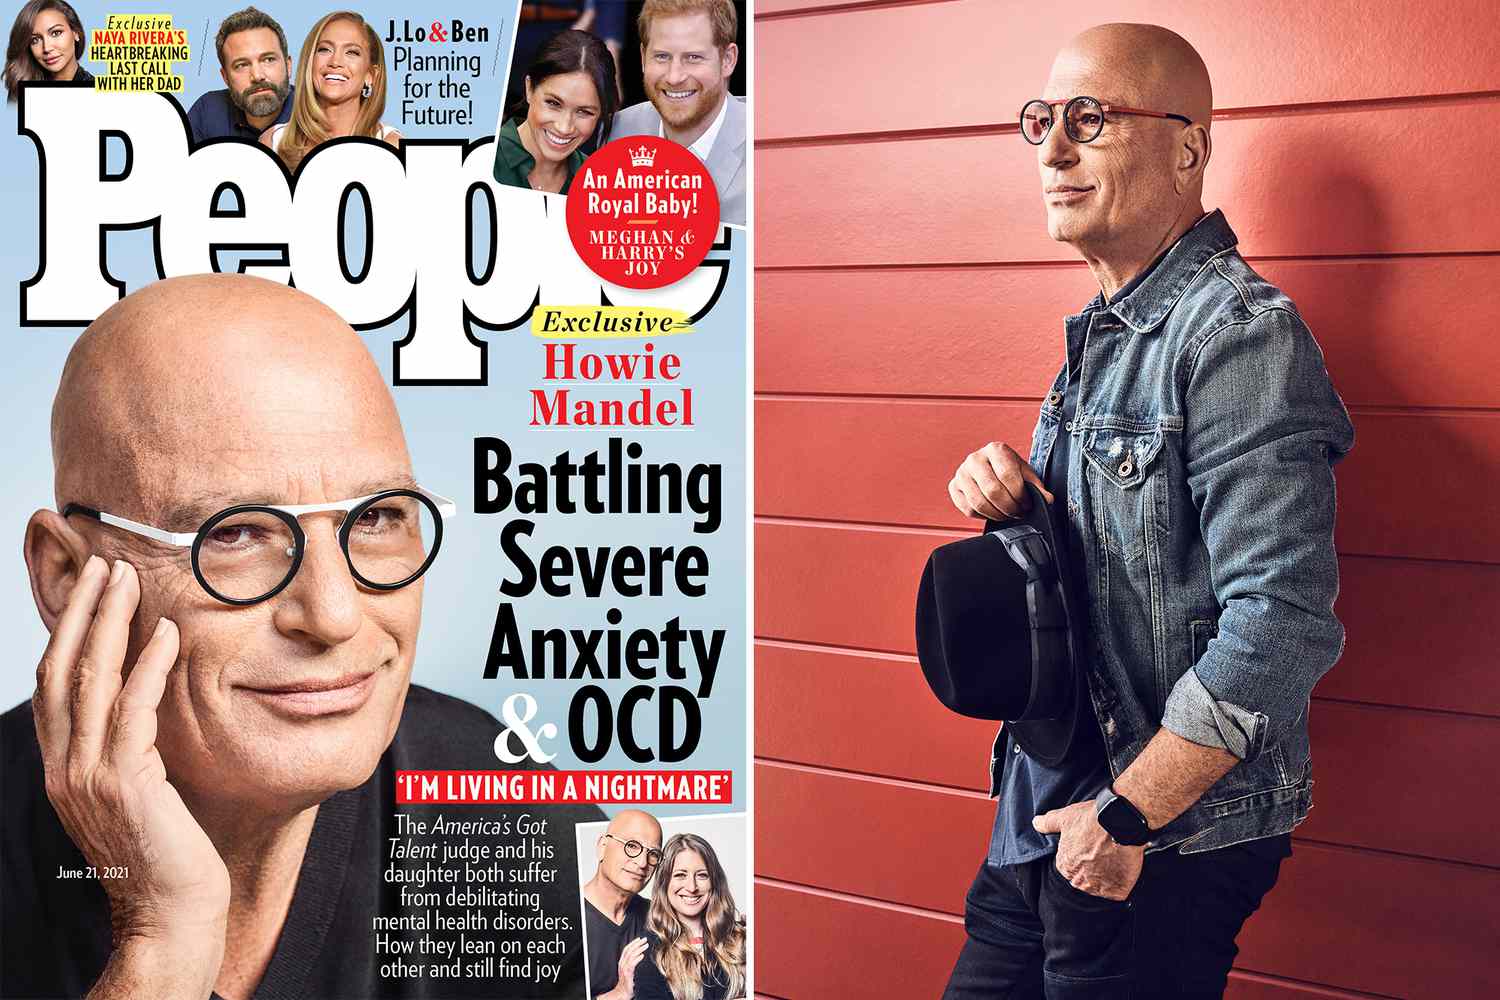 Howie Mandel Opens Up About His 'Painful' Struggle with Anxiety and OCD - Yahoo Entertainment